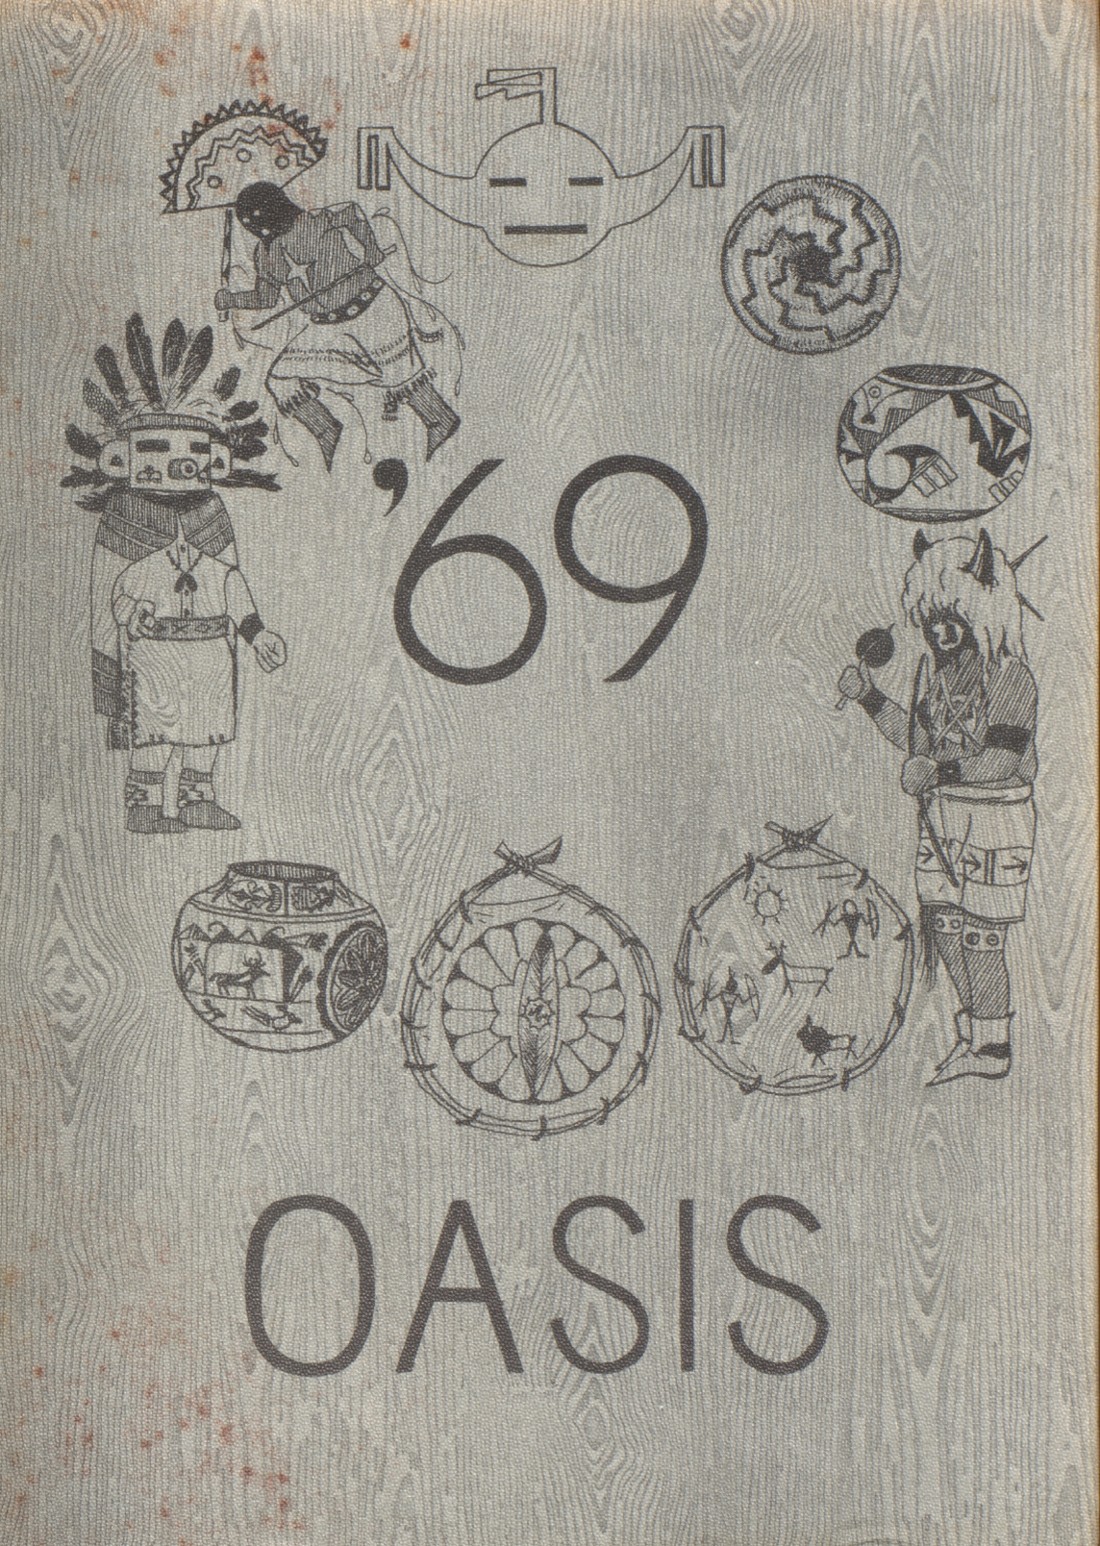 1969 yearbook from Ganado Mission High School from Ganado, Arizona for sale